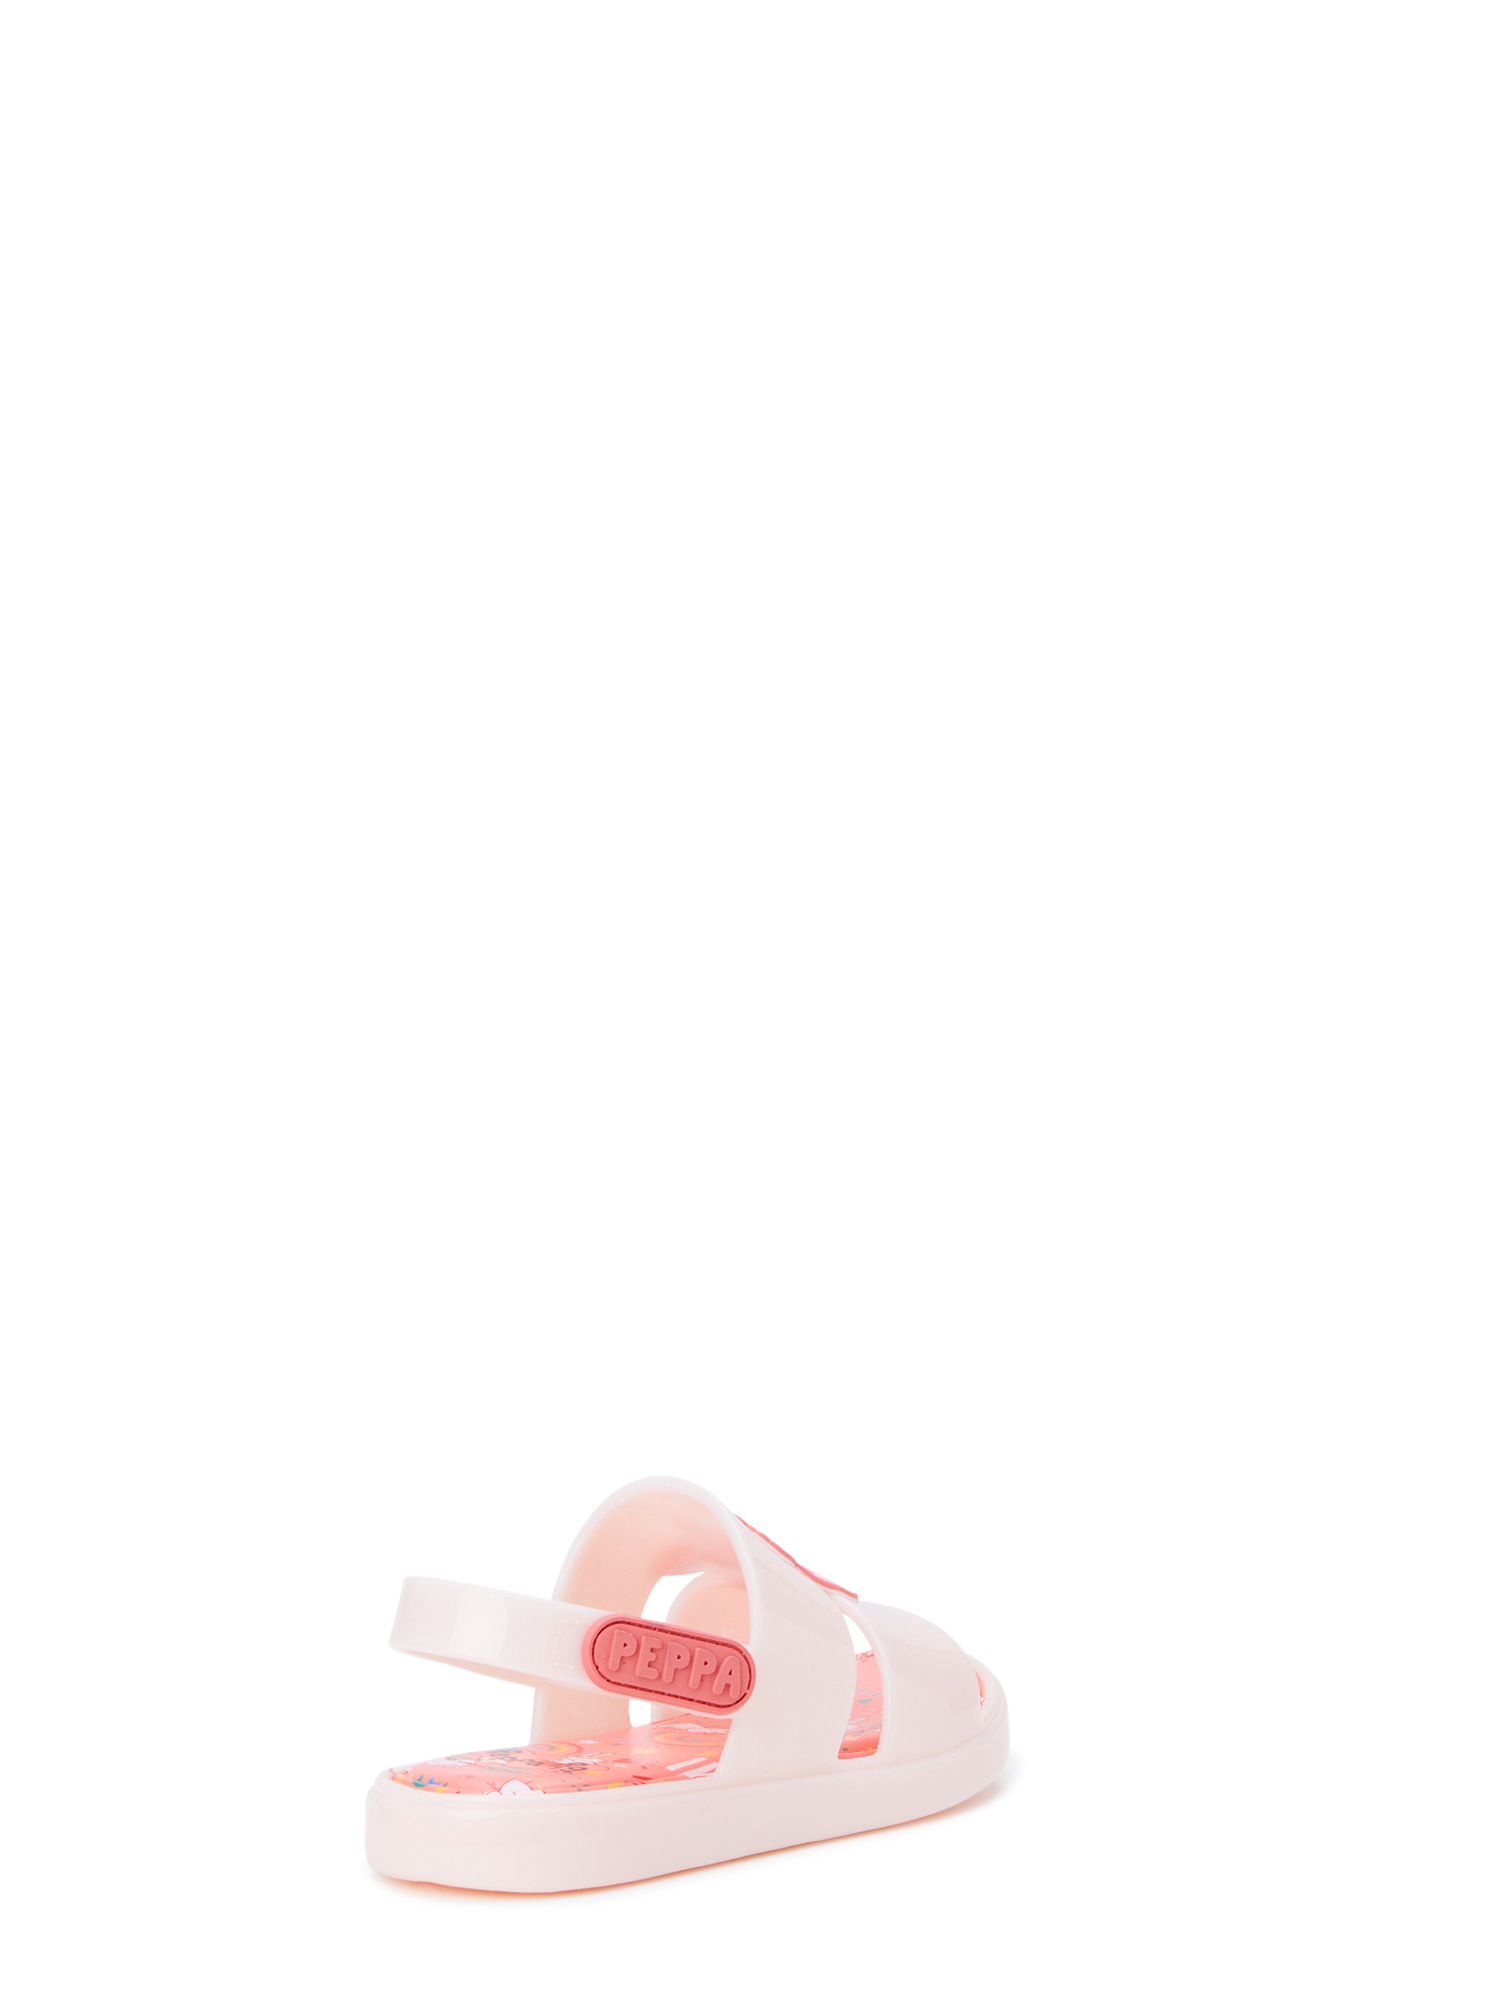 Peppa Pig Jelly Sandals